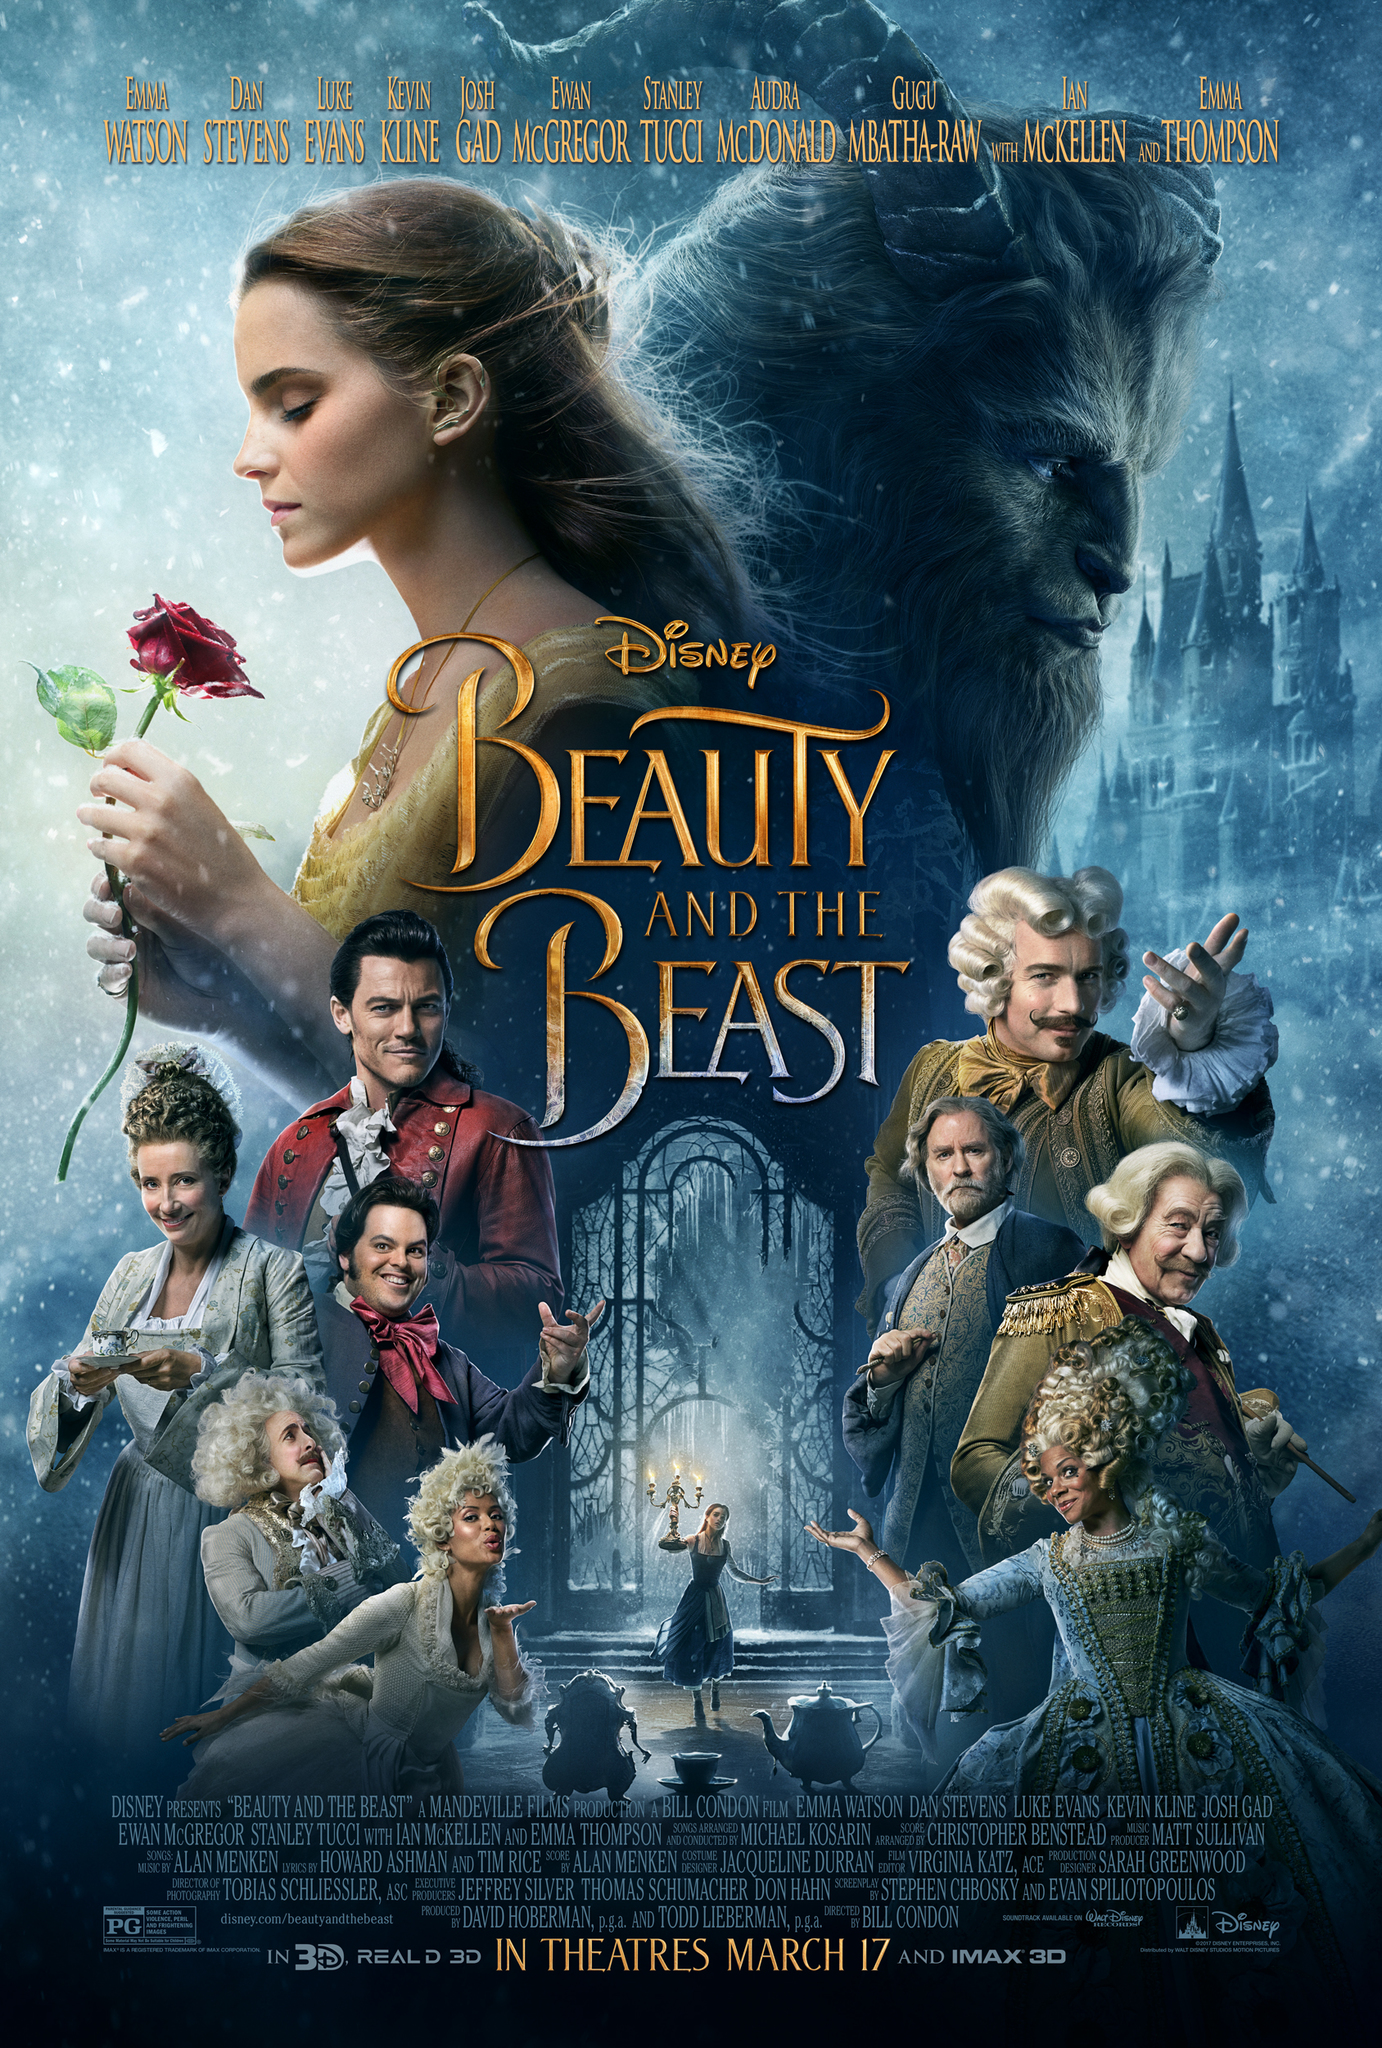 Beauty and the beast full movie in english